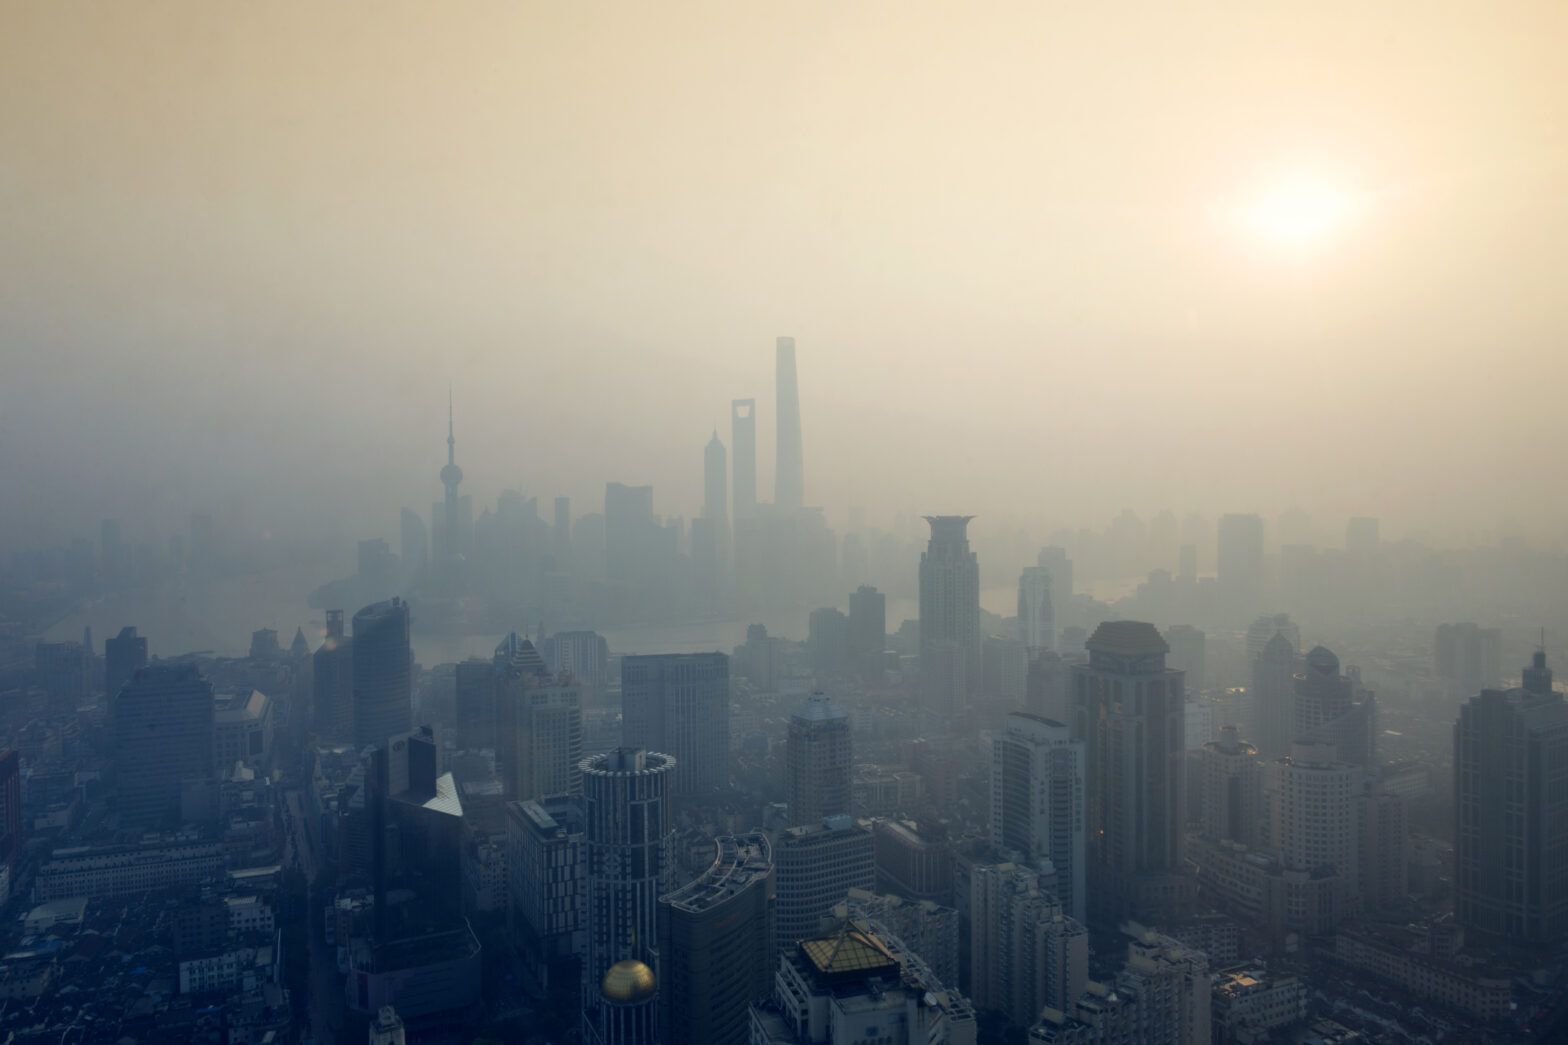 Opportunities in China’s carbon neutral plan